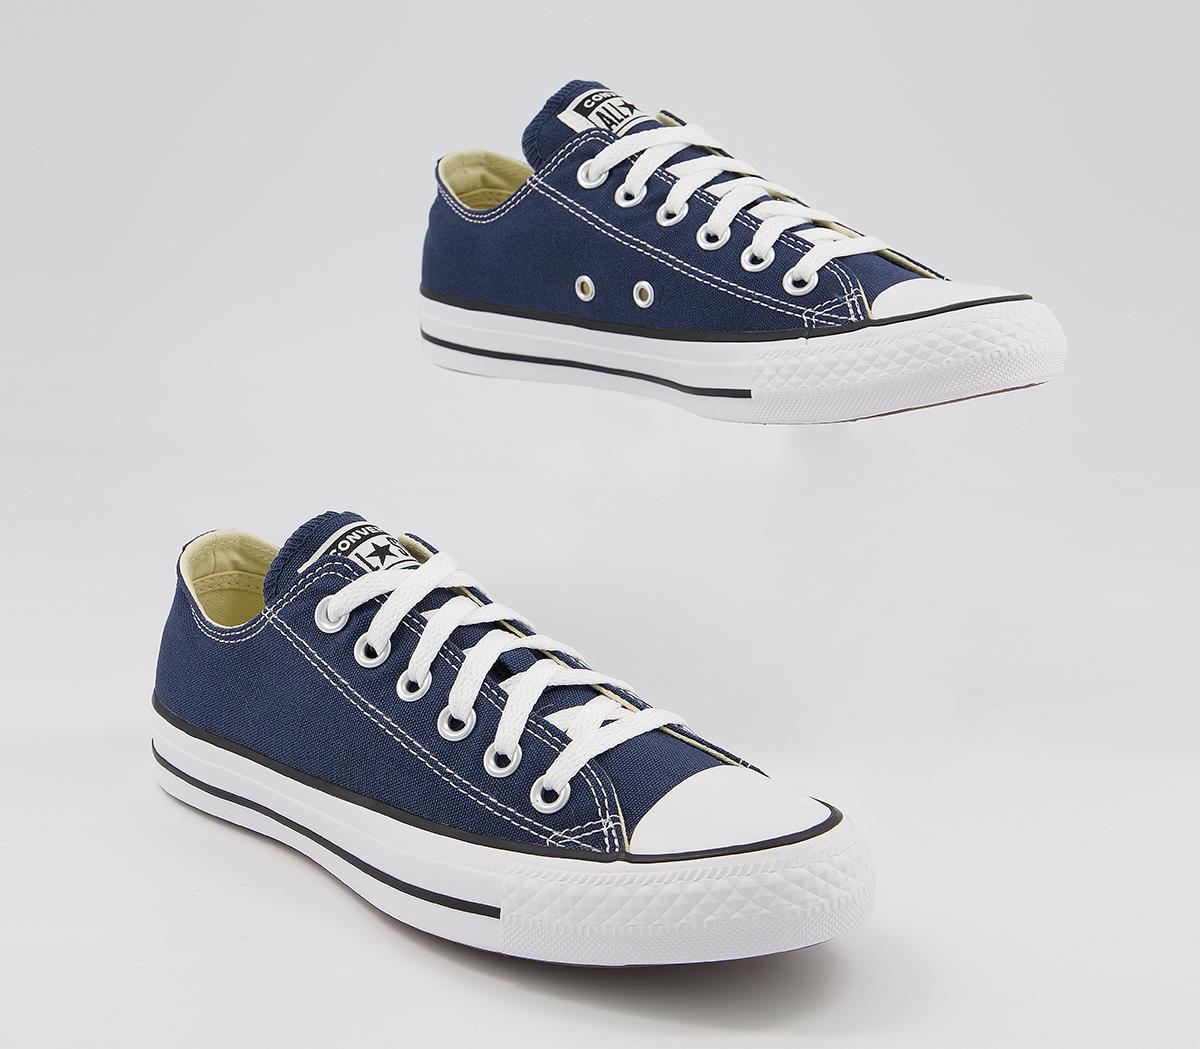 Converse All Star Low Trainers Navy Canvas - Unisex Sports